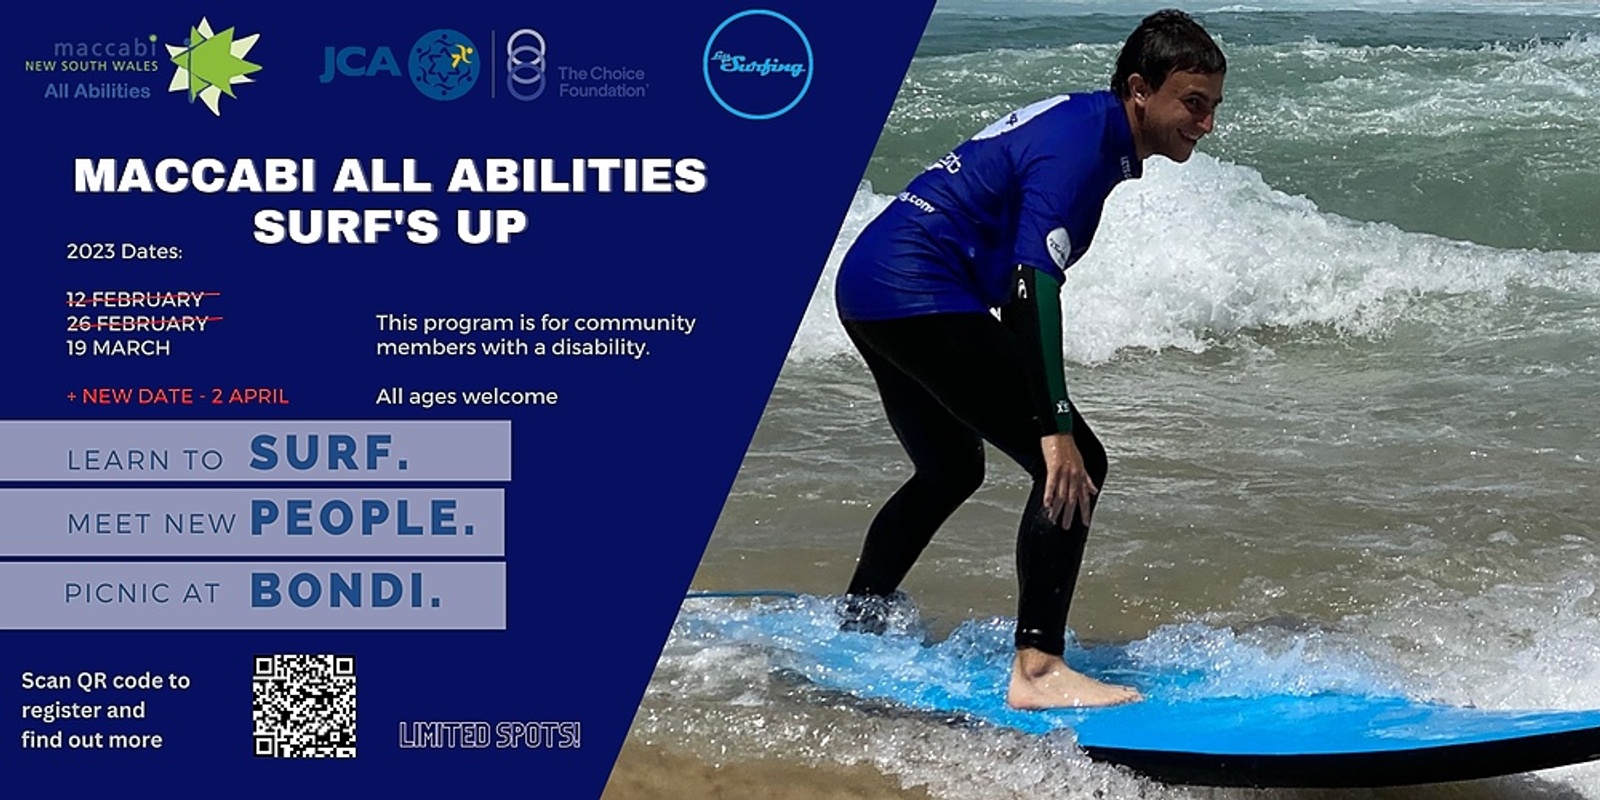 Surf's Up - Maccabi All Abilities